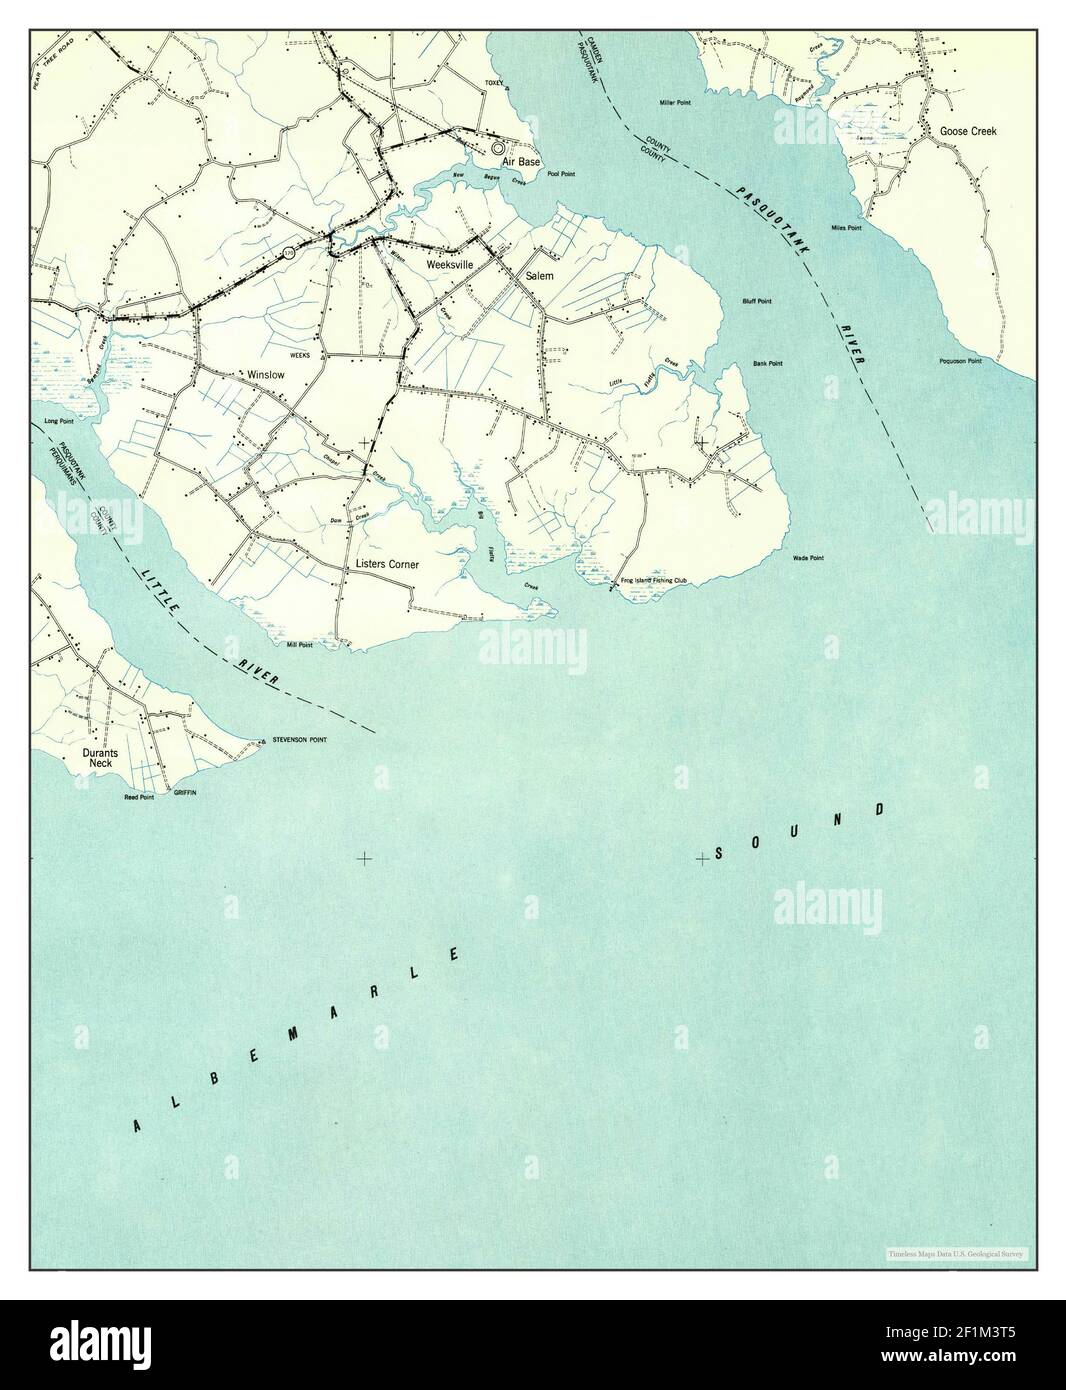 Wade Point, North Carolina, map 1948, 1:62500, United States of America by Timeless Maps, data U.S. Geological Survey Stock Photo